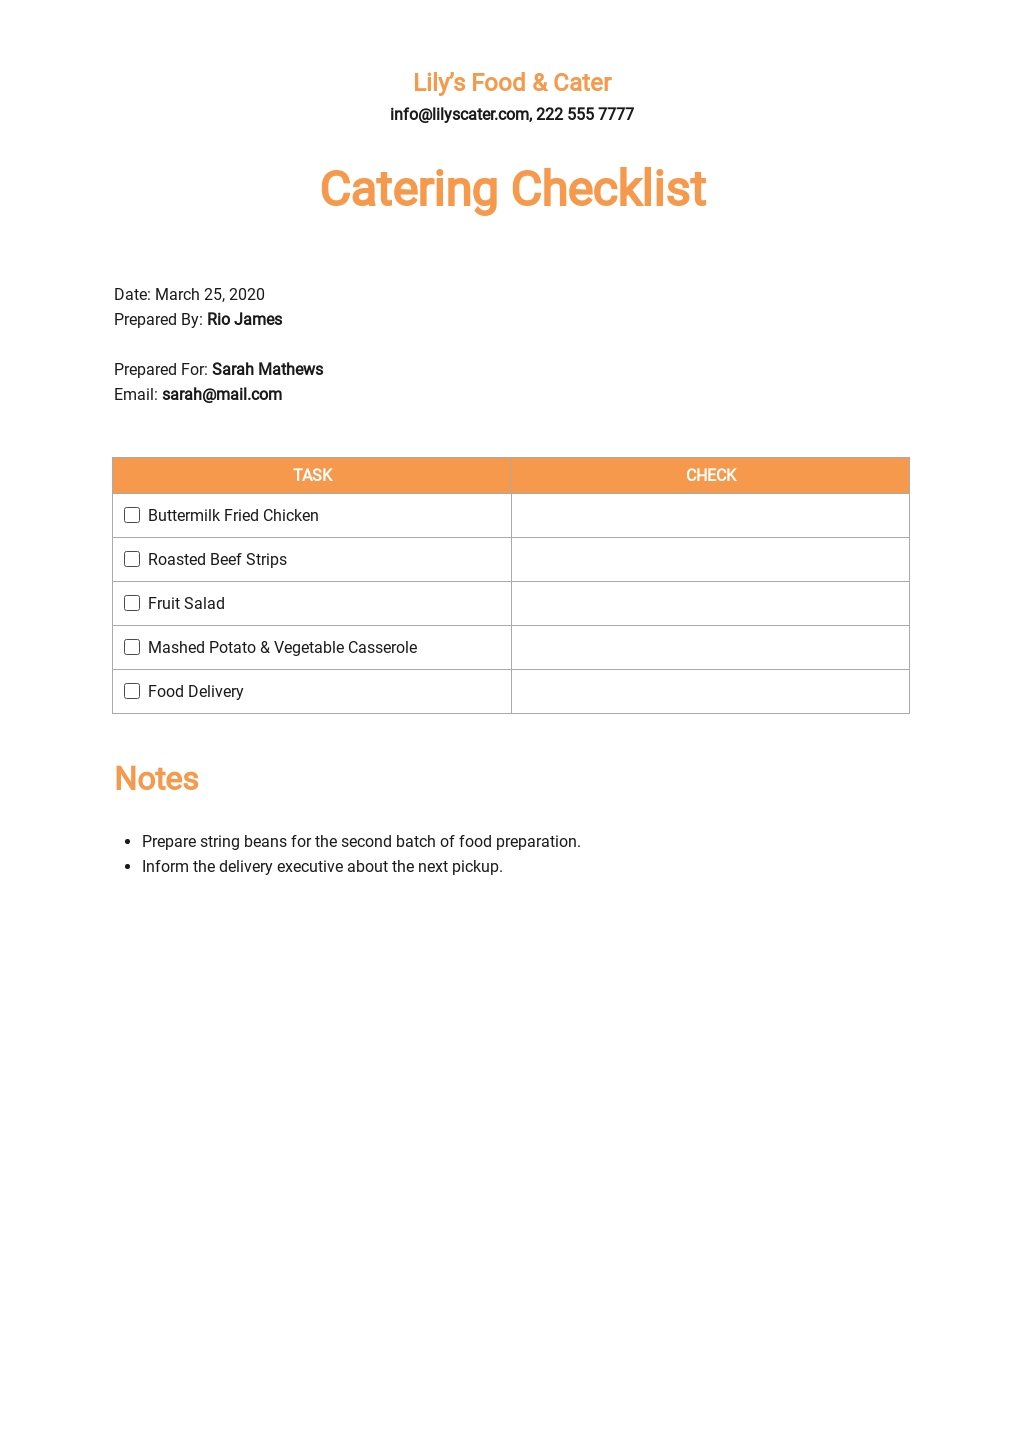 Catering Checklist Template.jpe